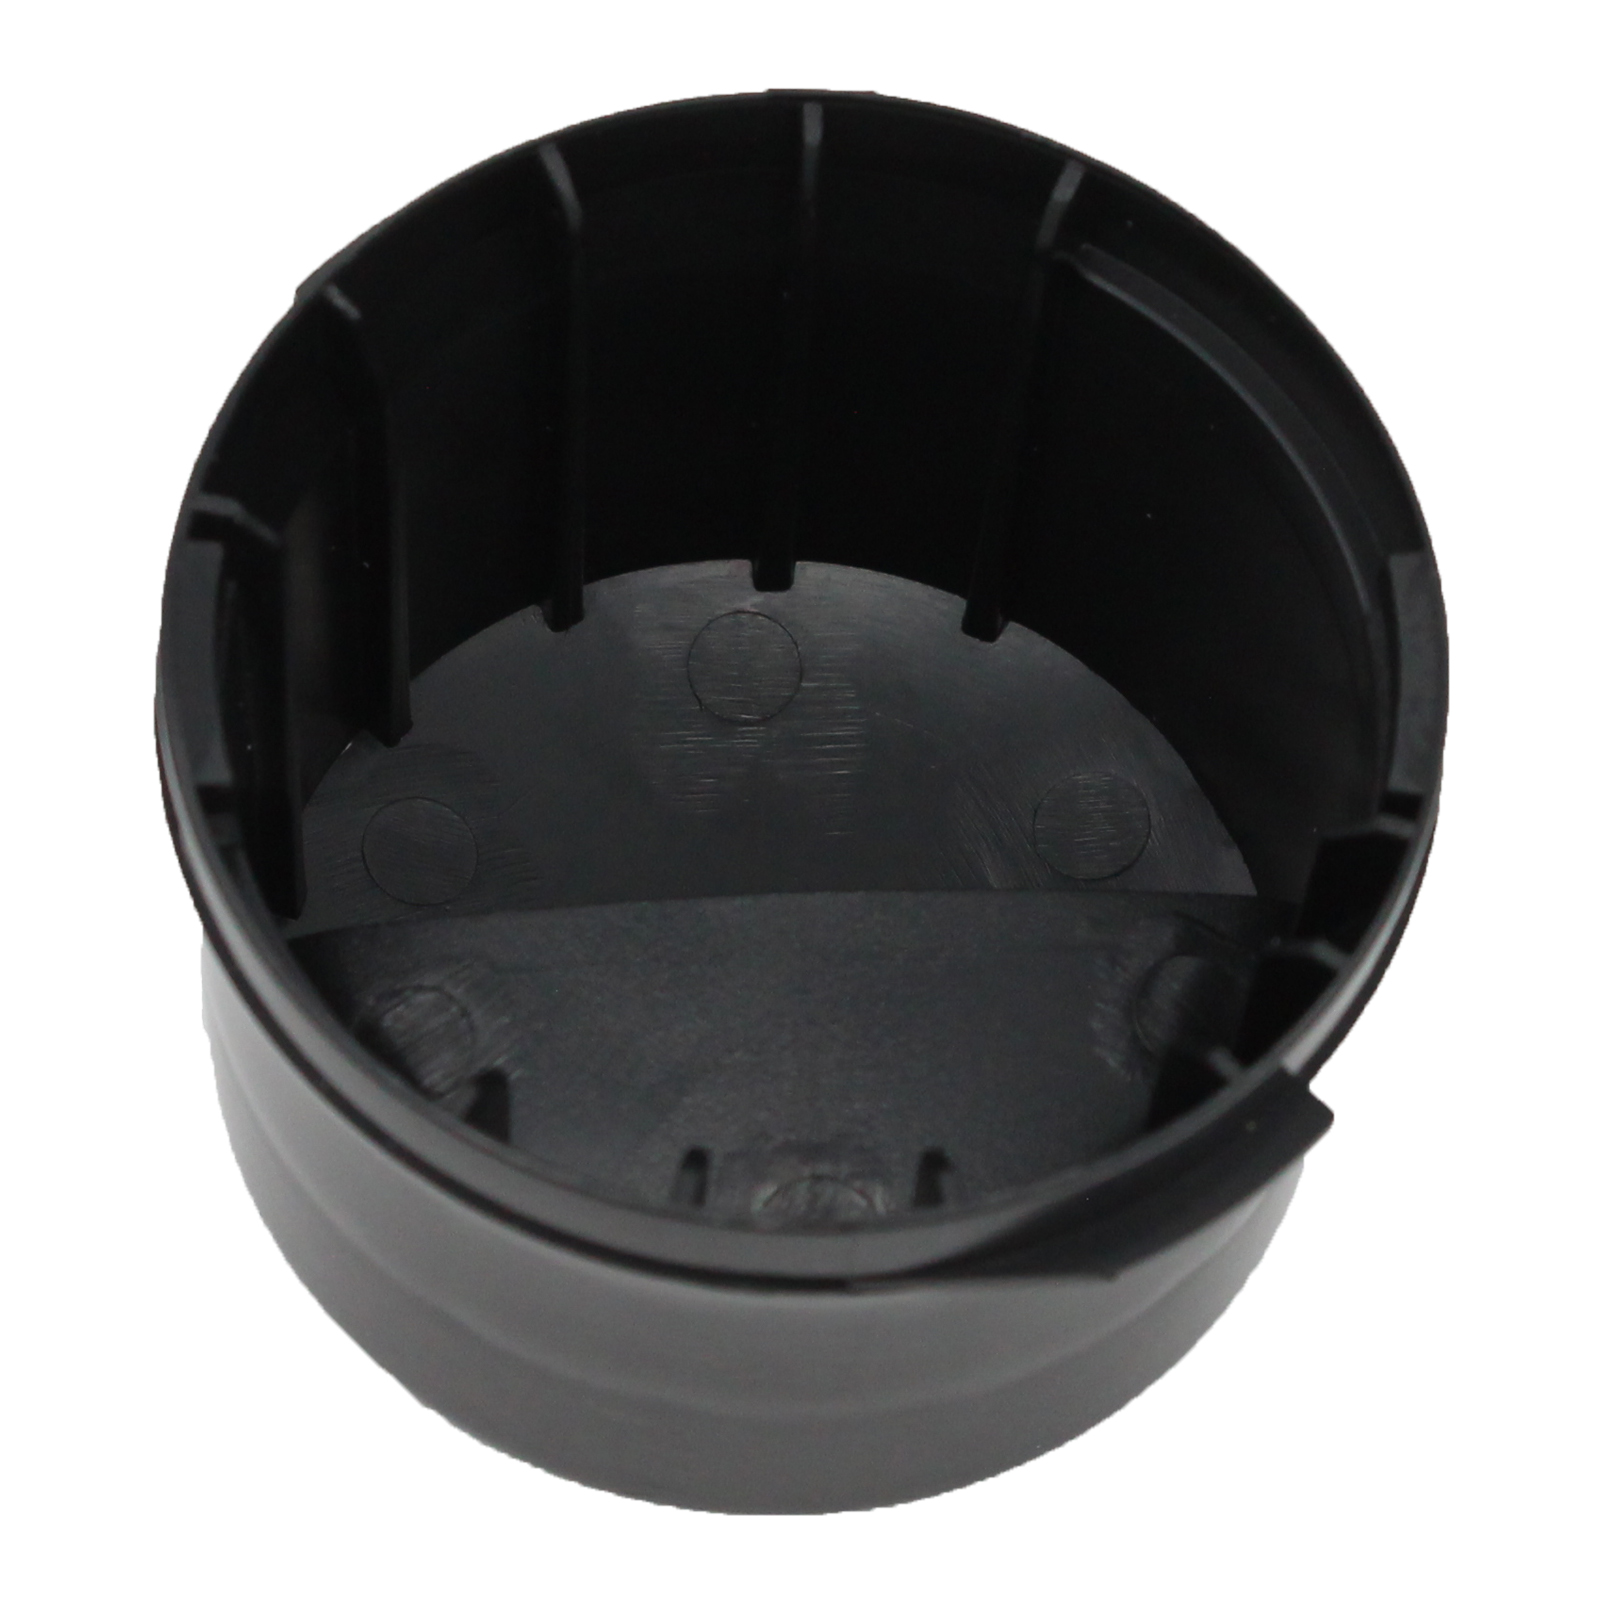 2260502B Refrigerator Water Filter Cap Replacement for KitchenAid KBLO36FTX05 Refrigerator - Compatible with WP2260518B Black Water Filter Cap - UpStart Components Brand - image 4 of 4